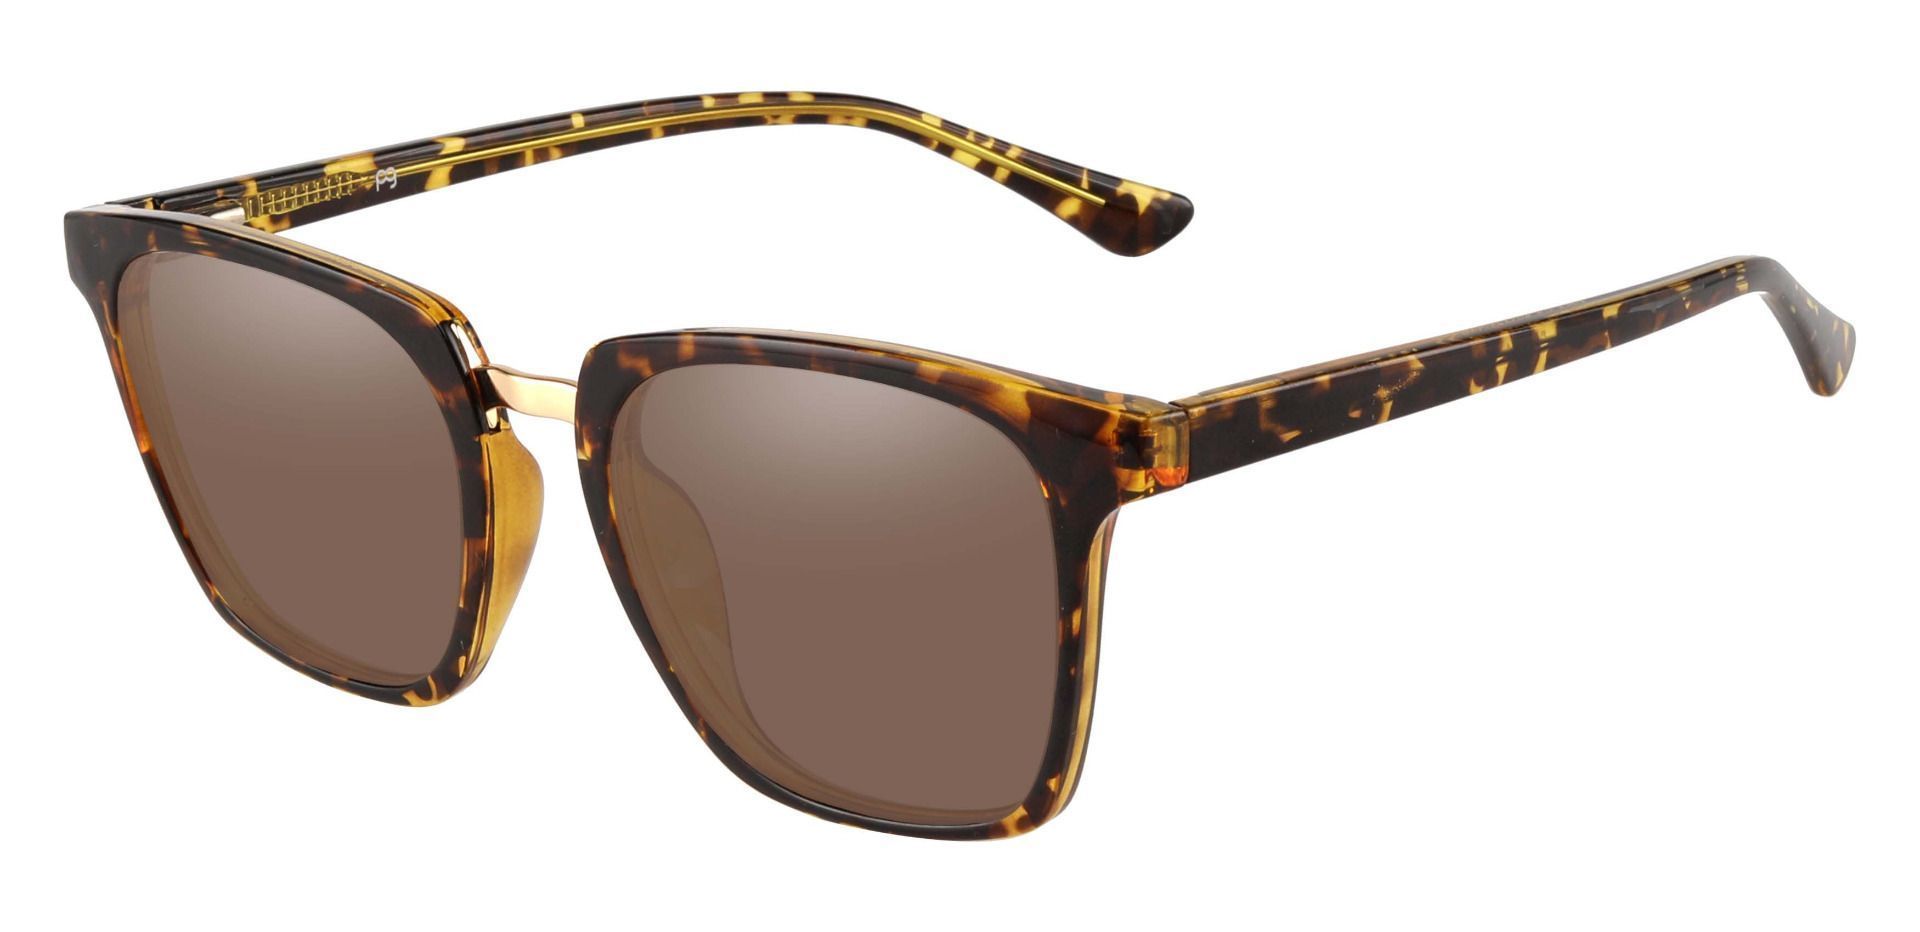 Delta Square Lined Bifocal Sunglasses - Tortoise Frame With Brown Lenses